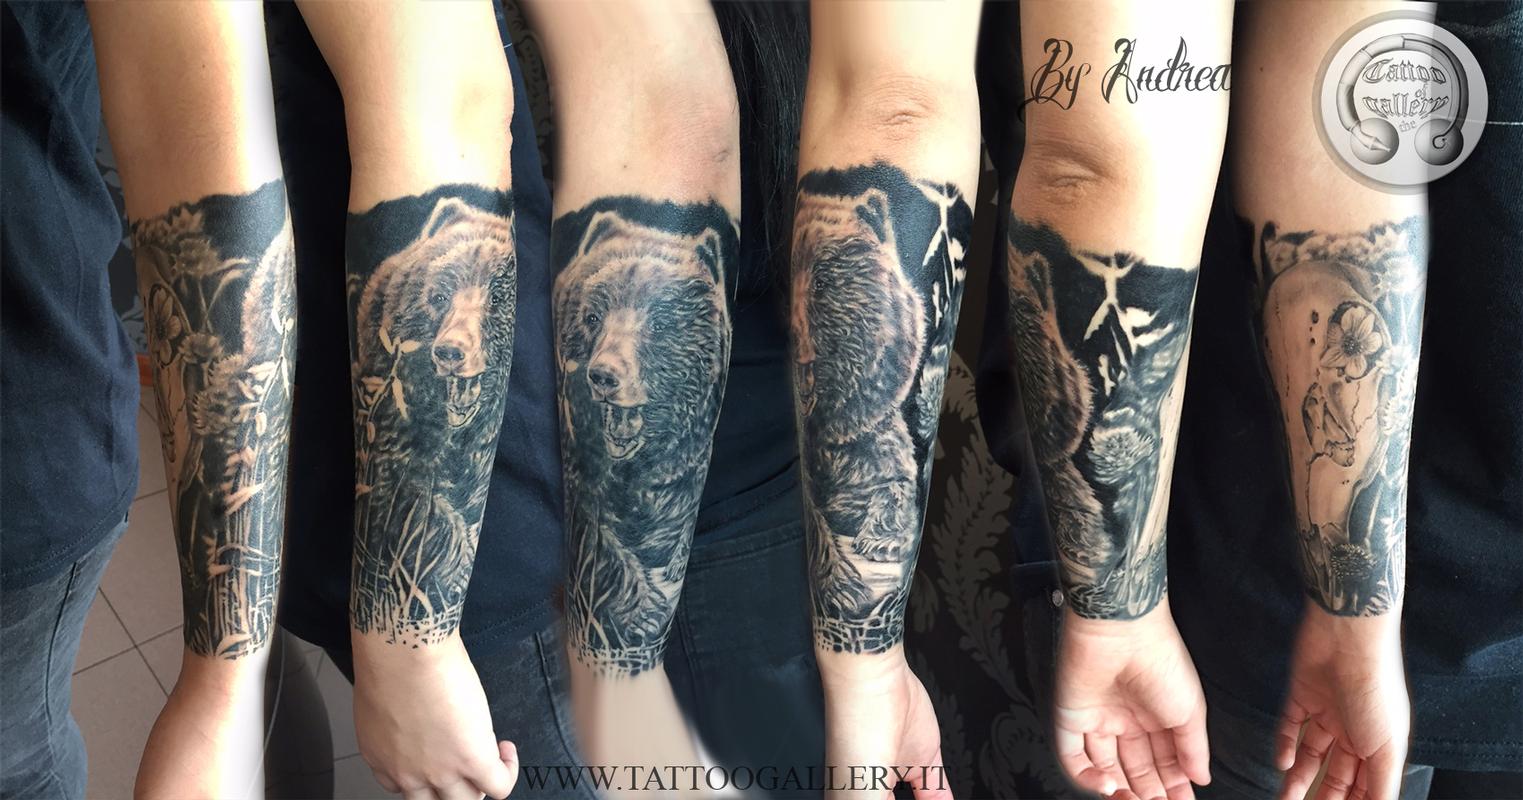 The Gallery Of Tattoo : Tattoos : Body Part Arm : Bear